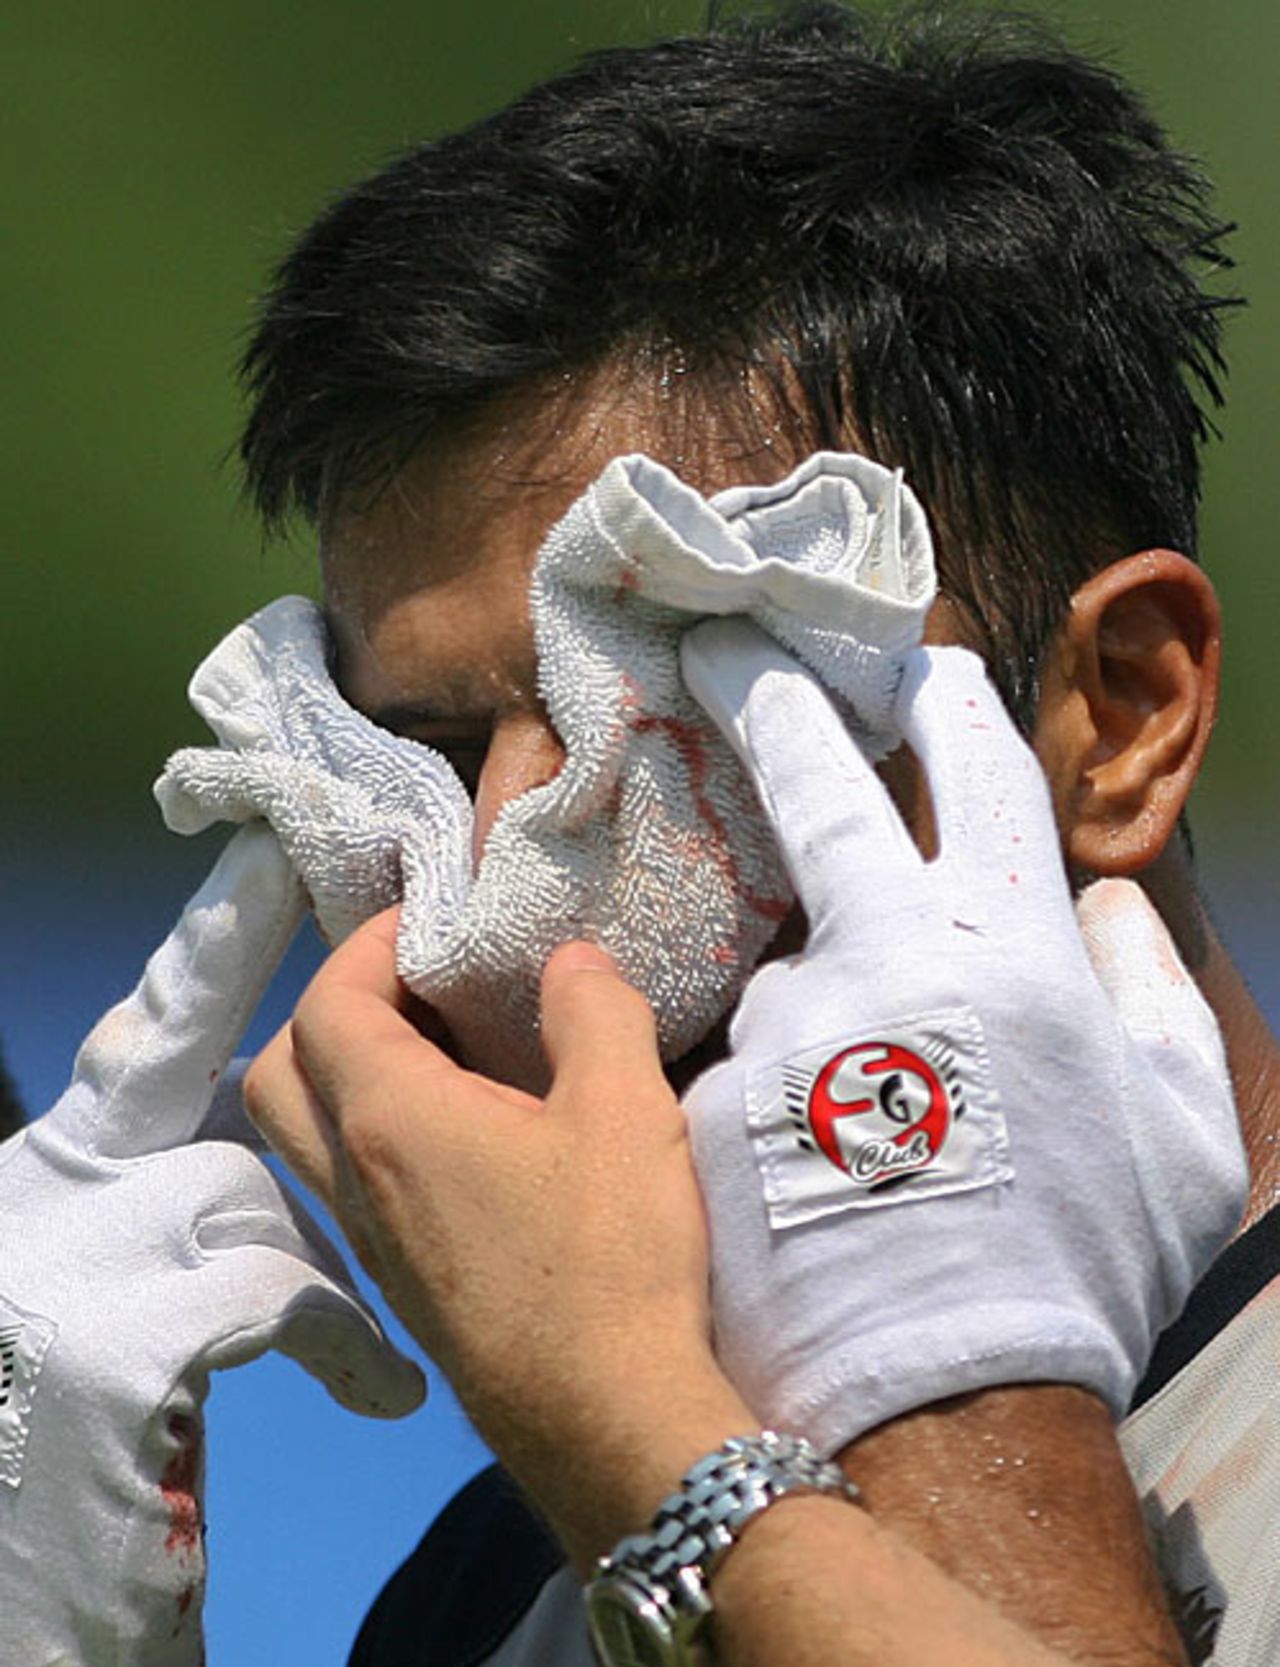 Rahul Dravid's face is covered by a bloody towel after after being hit on the nose in a net session, Eden Gardens, Kolkata, May 5, 2007